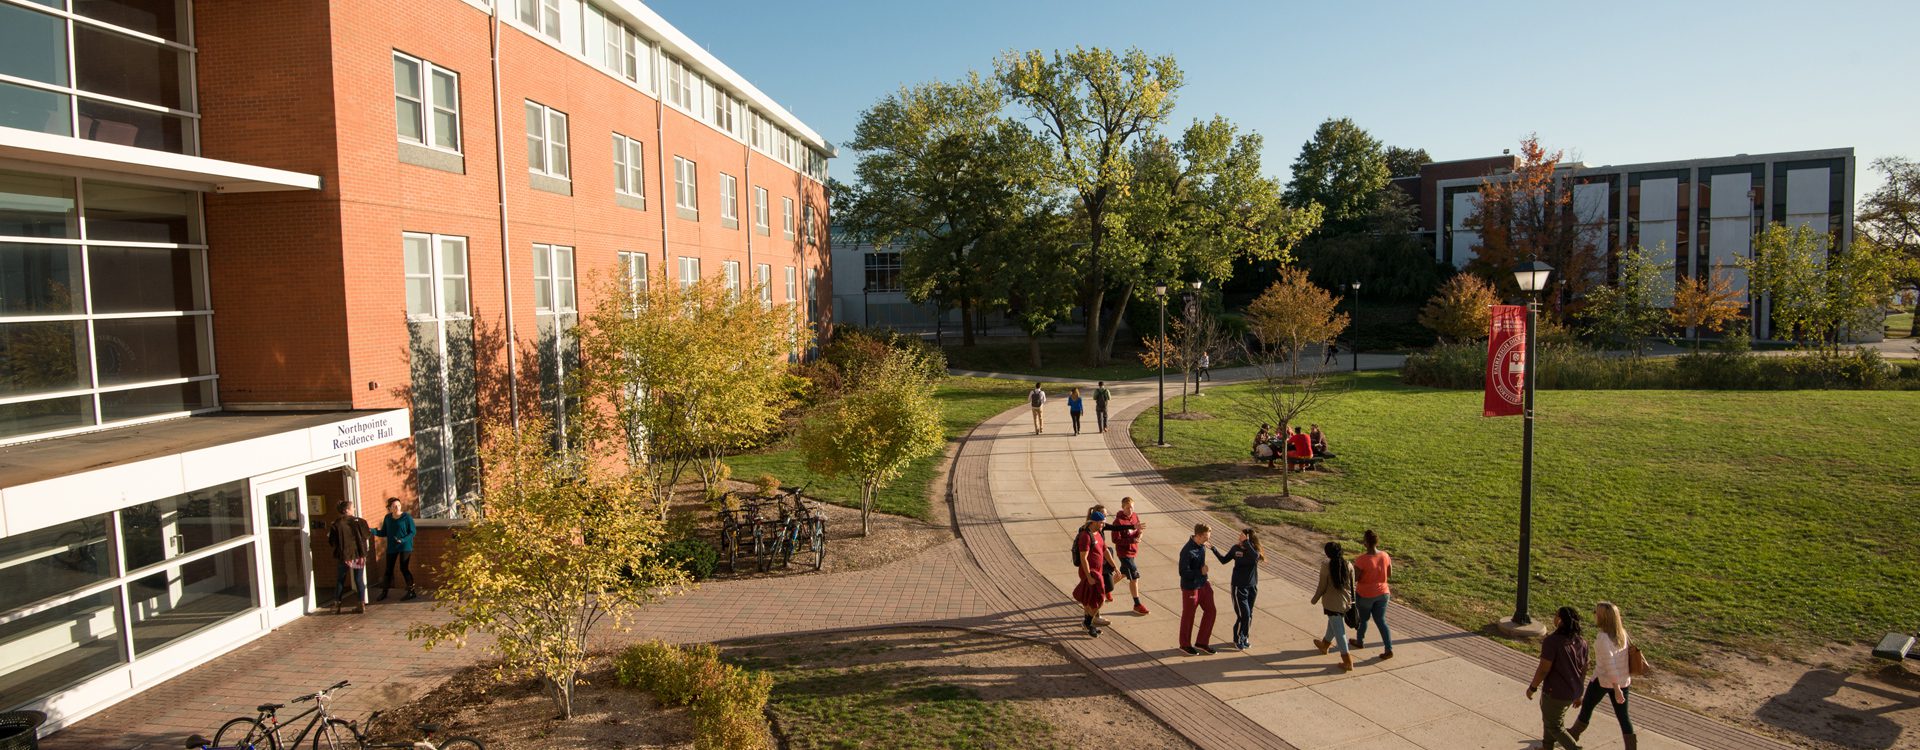 Northpointe Residence Hall path with students walking on the Metropolitan Campus.